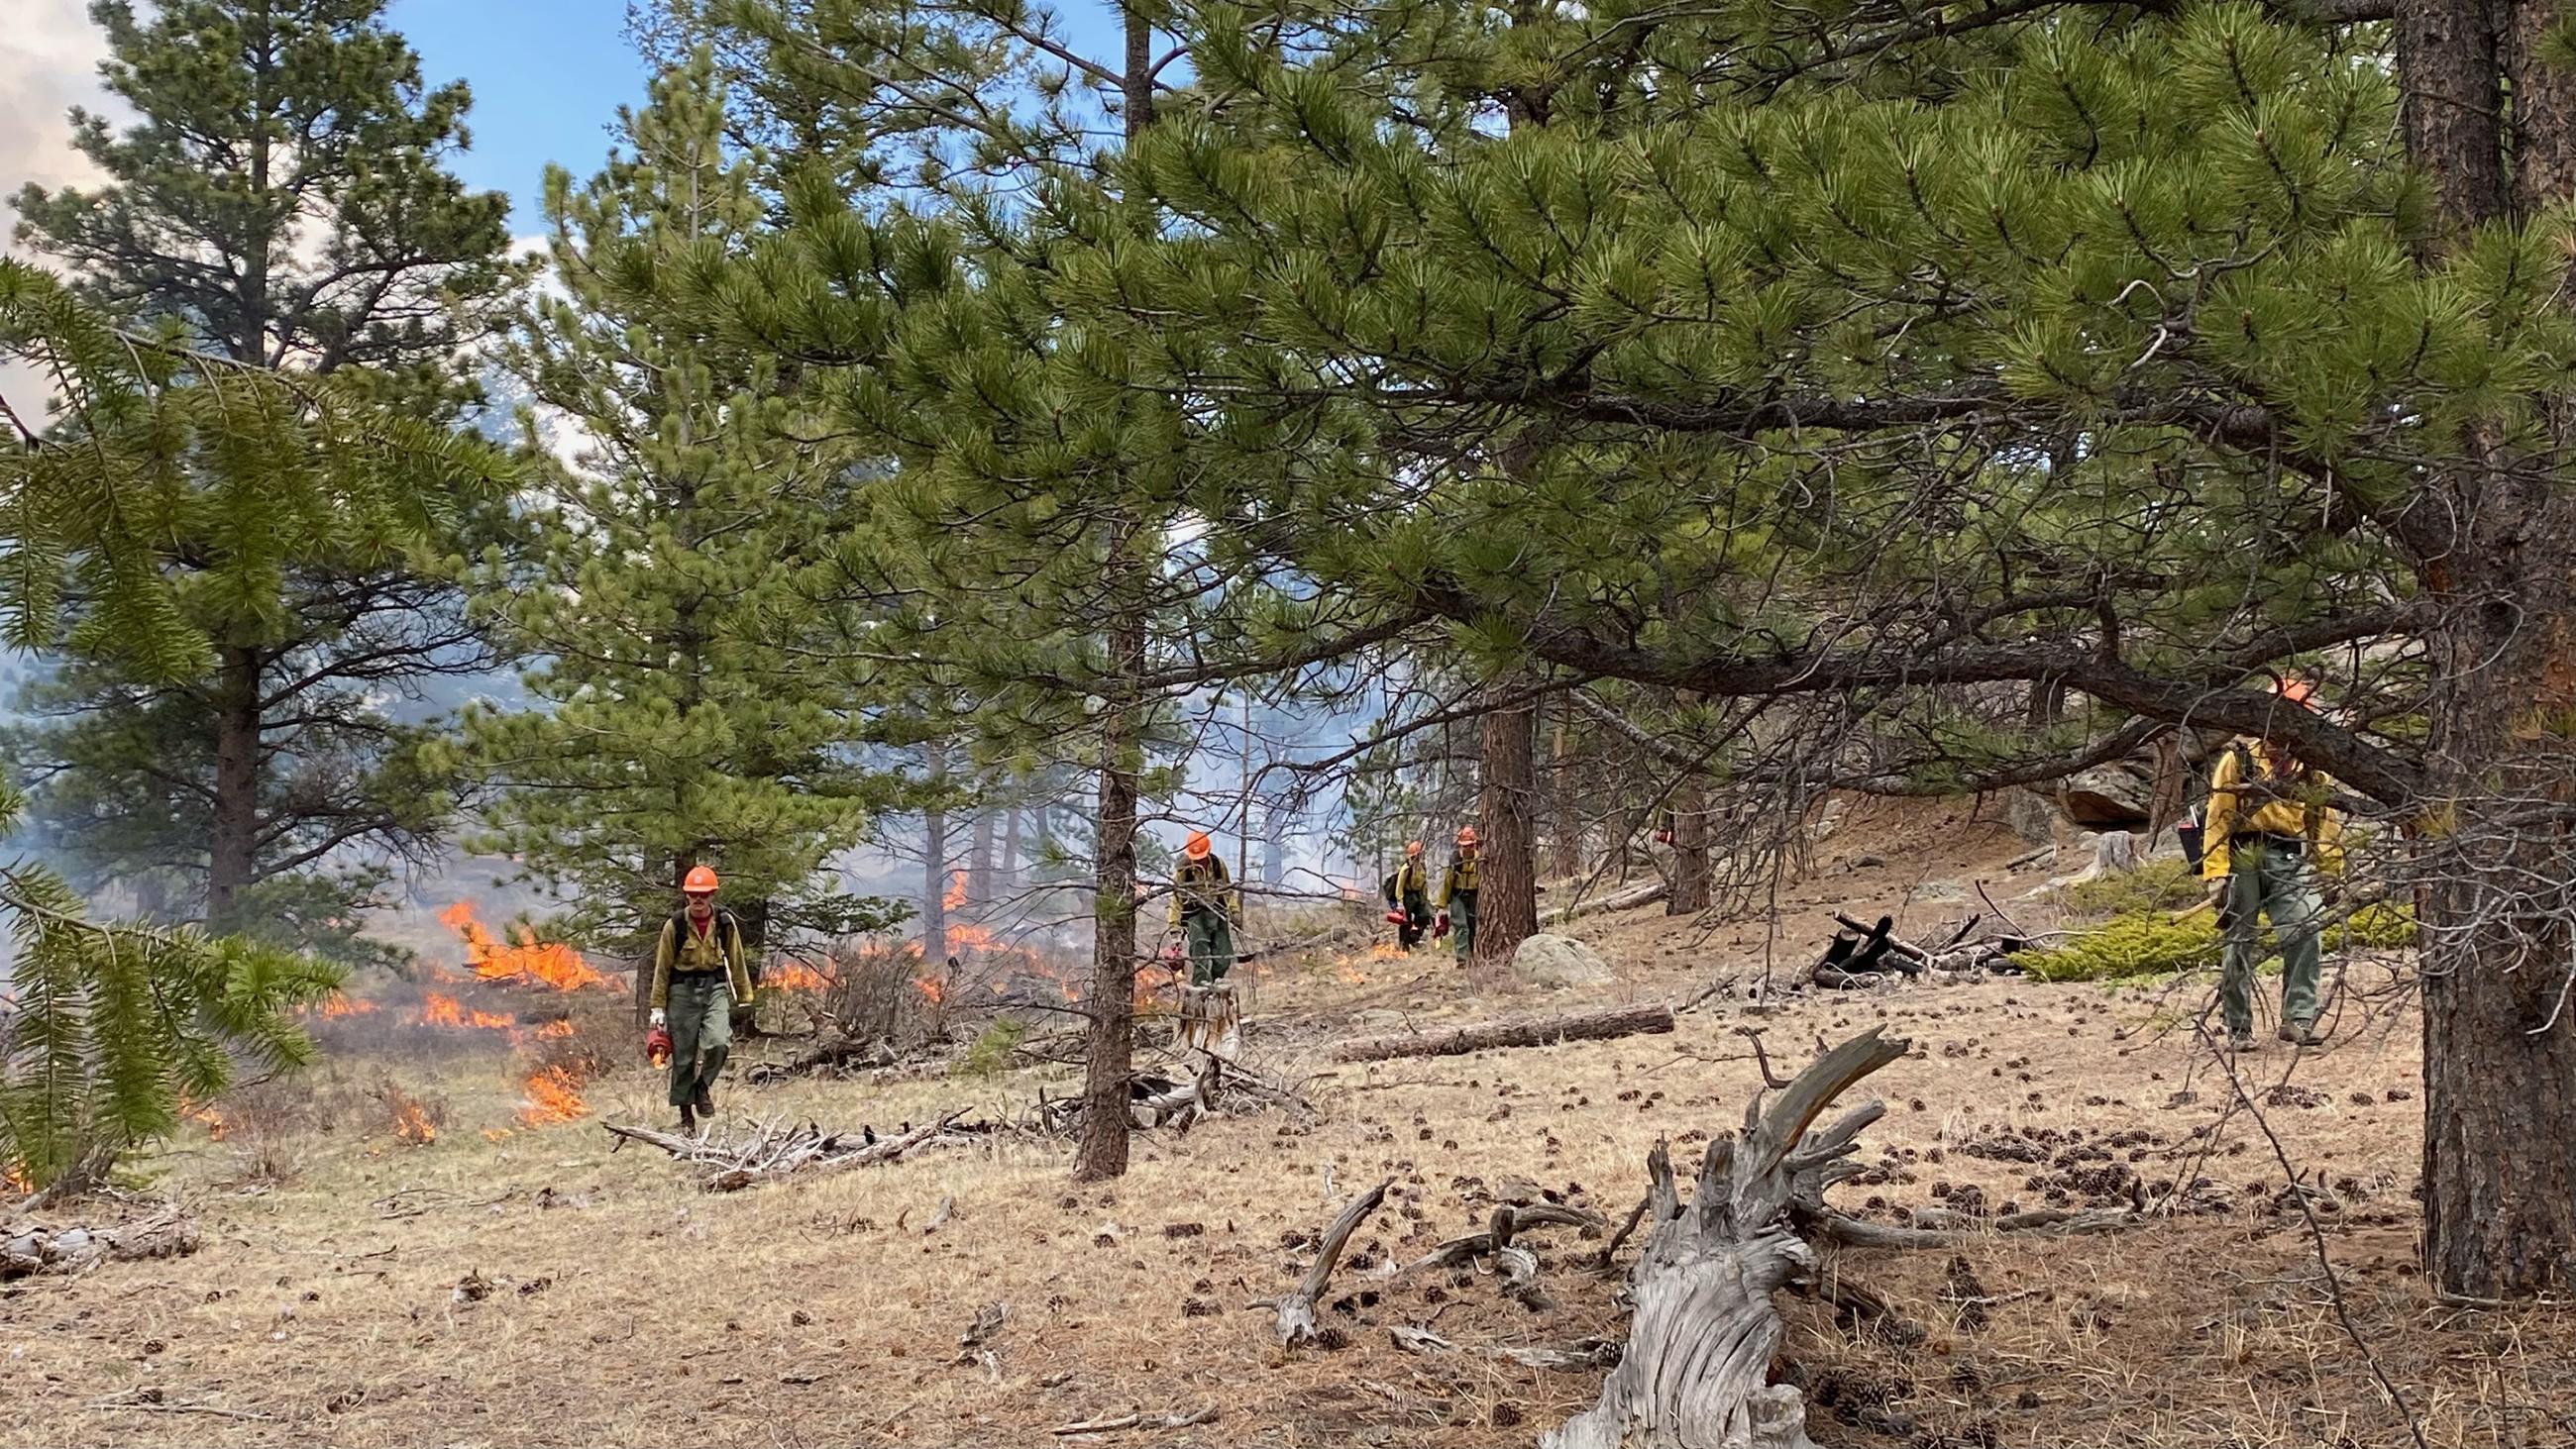 Firefighters walking through a forest landscape dropping fire from drip torches.